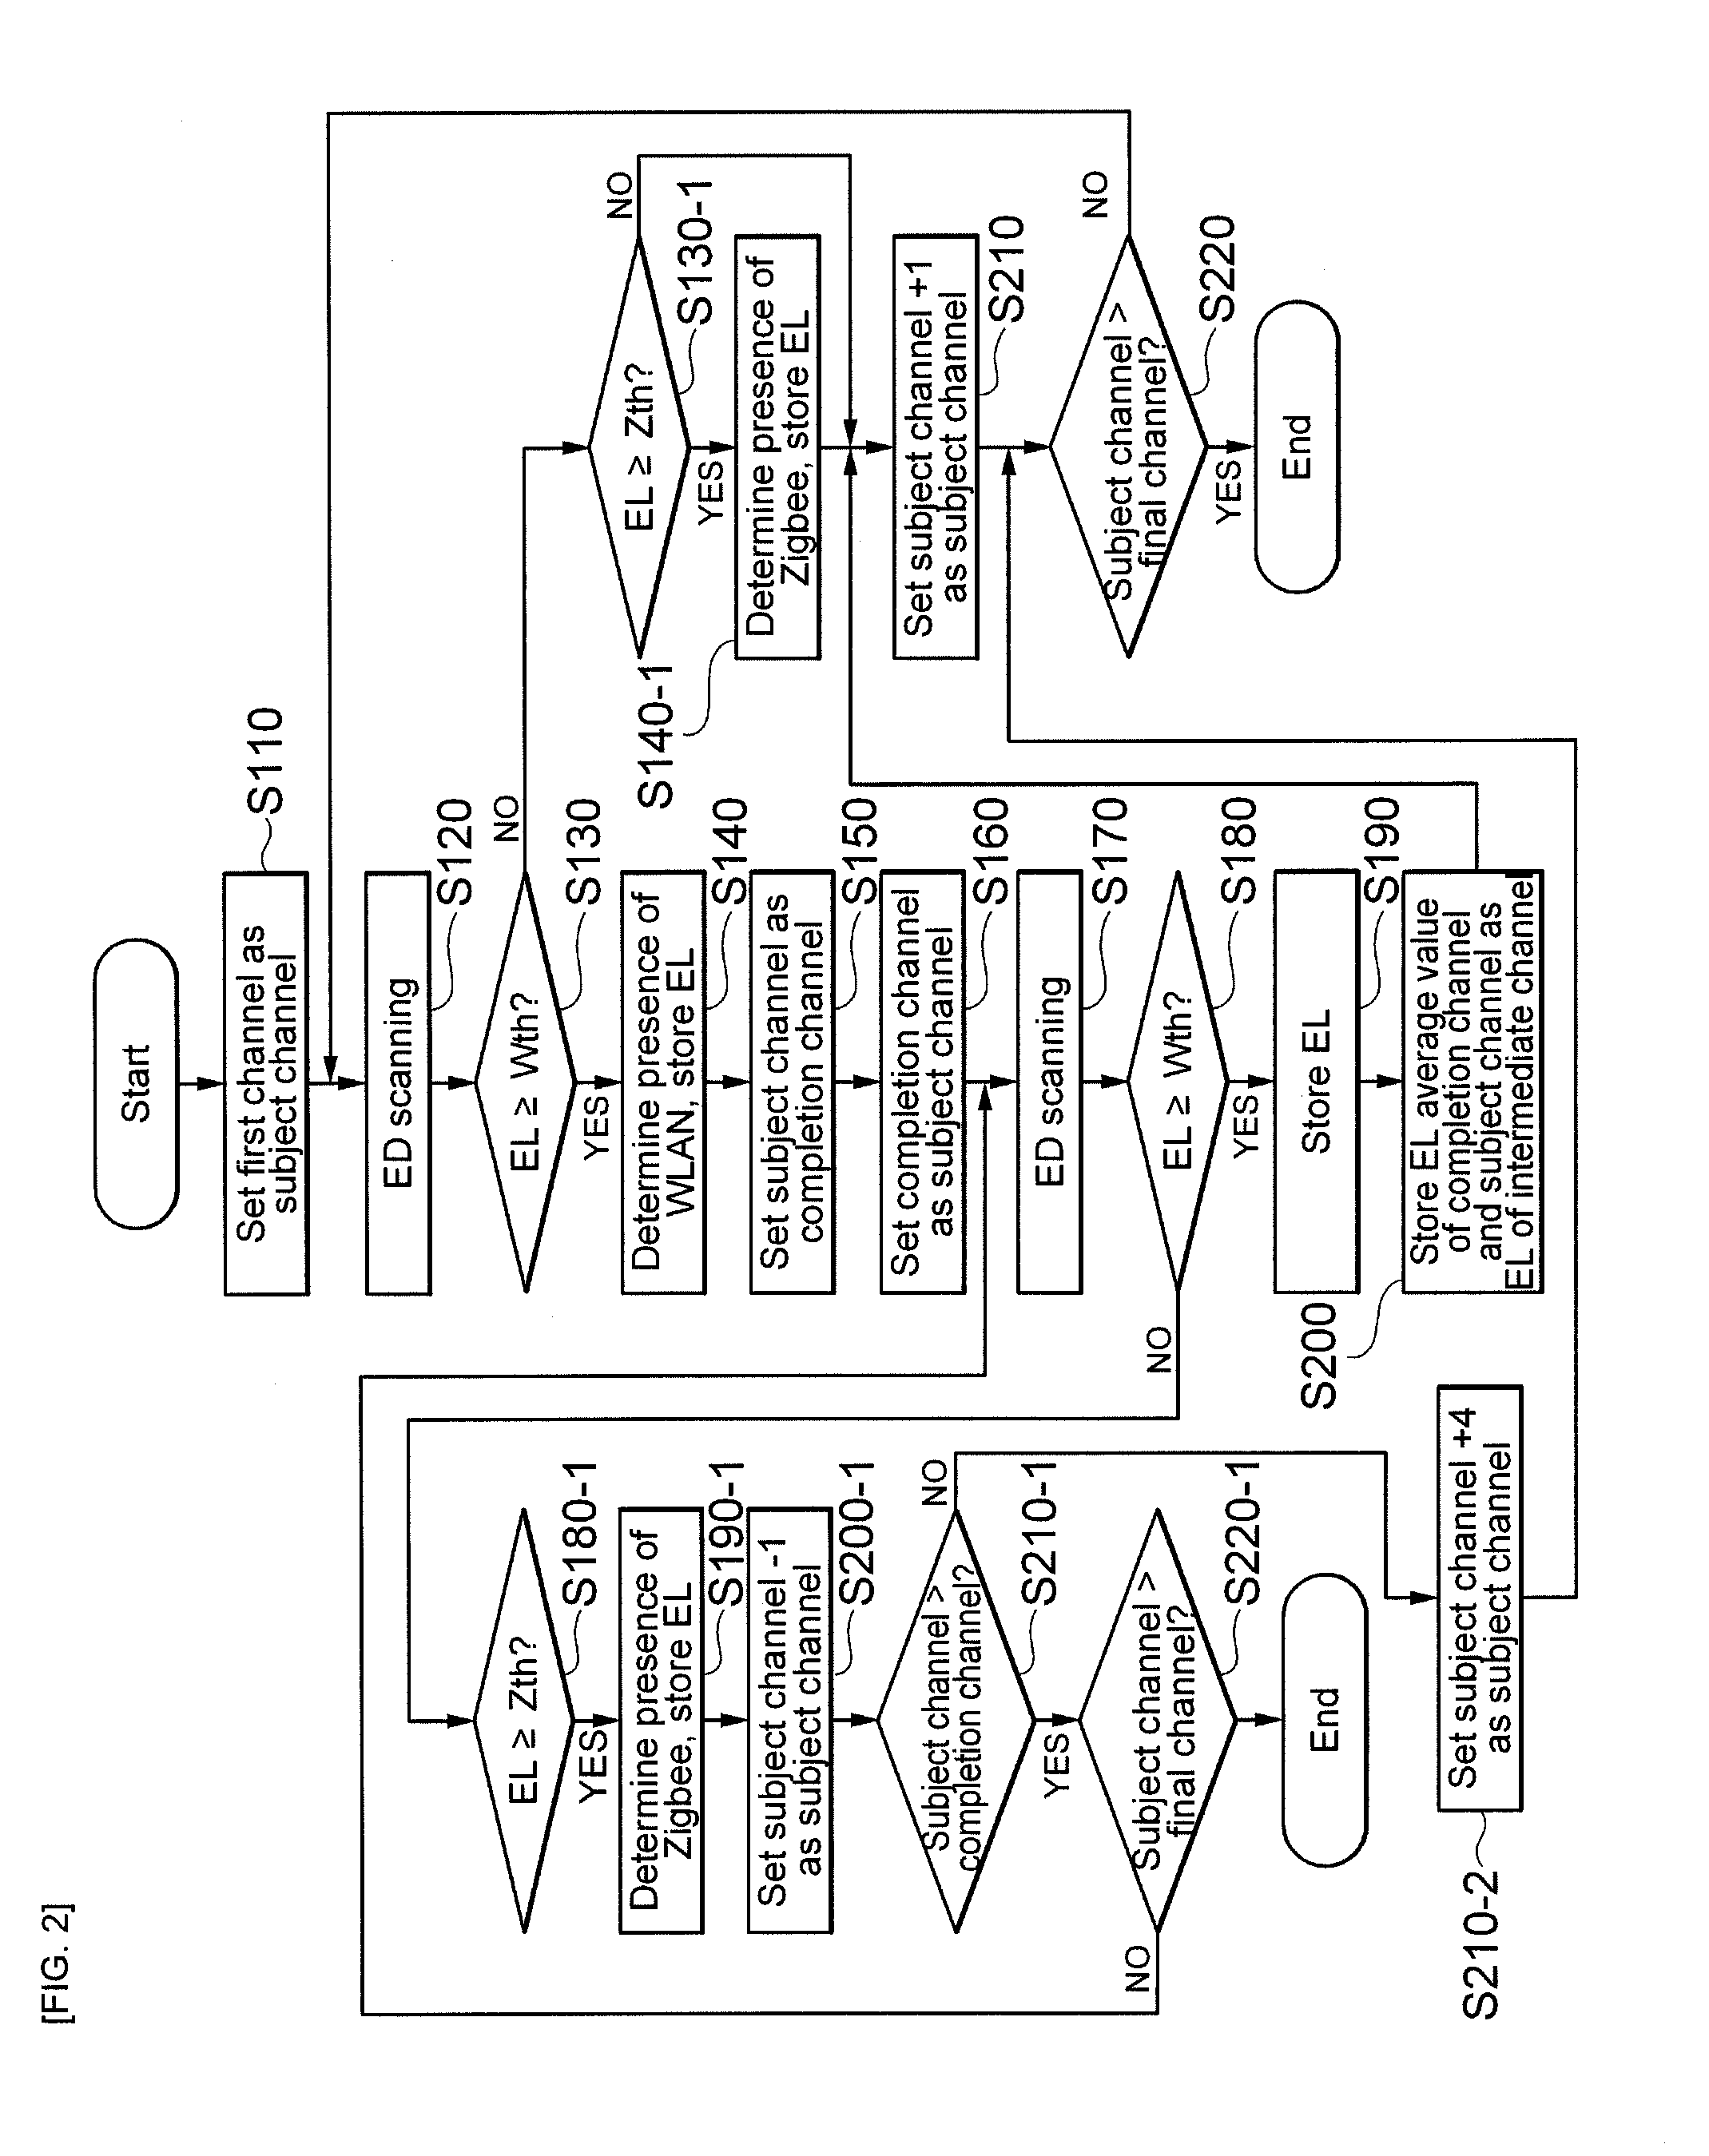 Method of getting energy level of communication channel